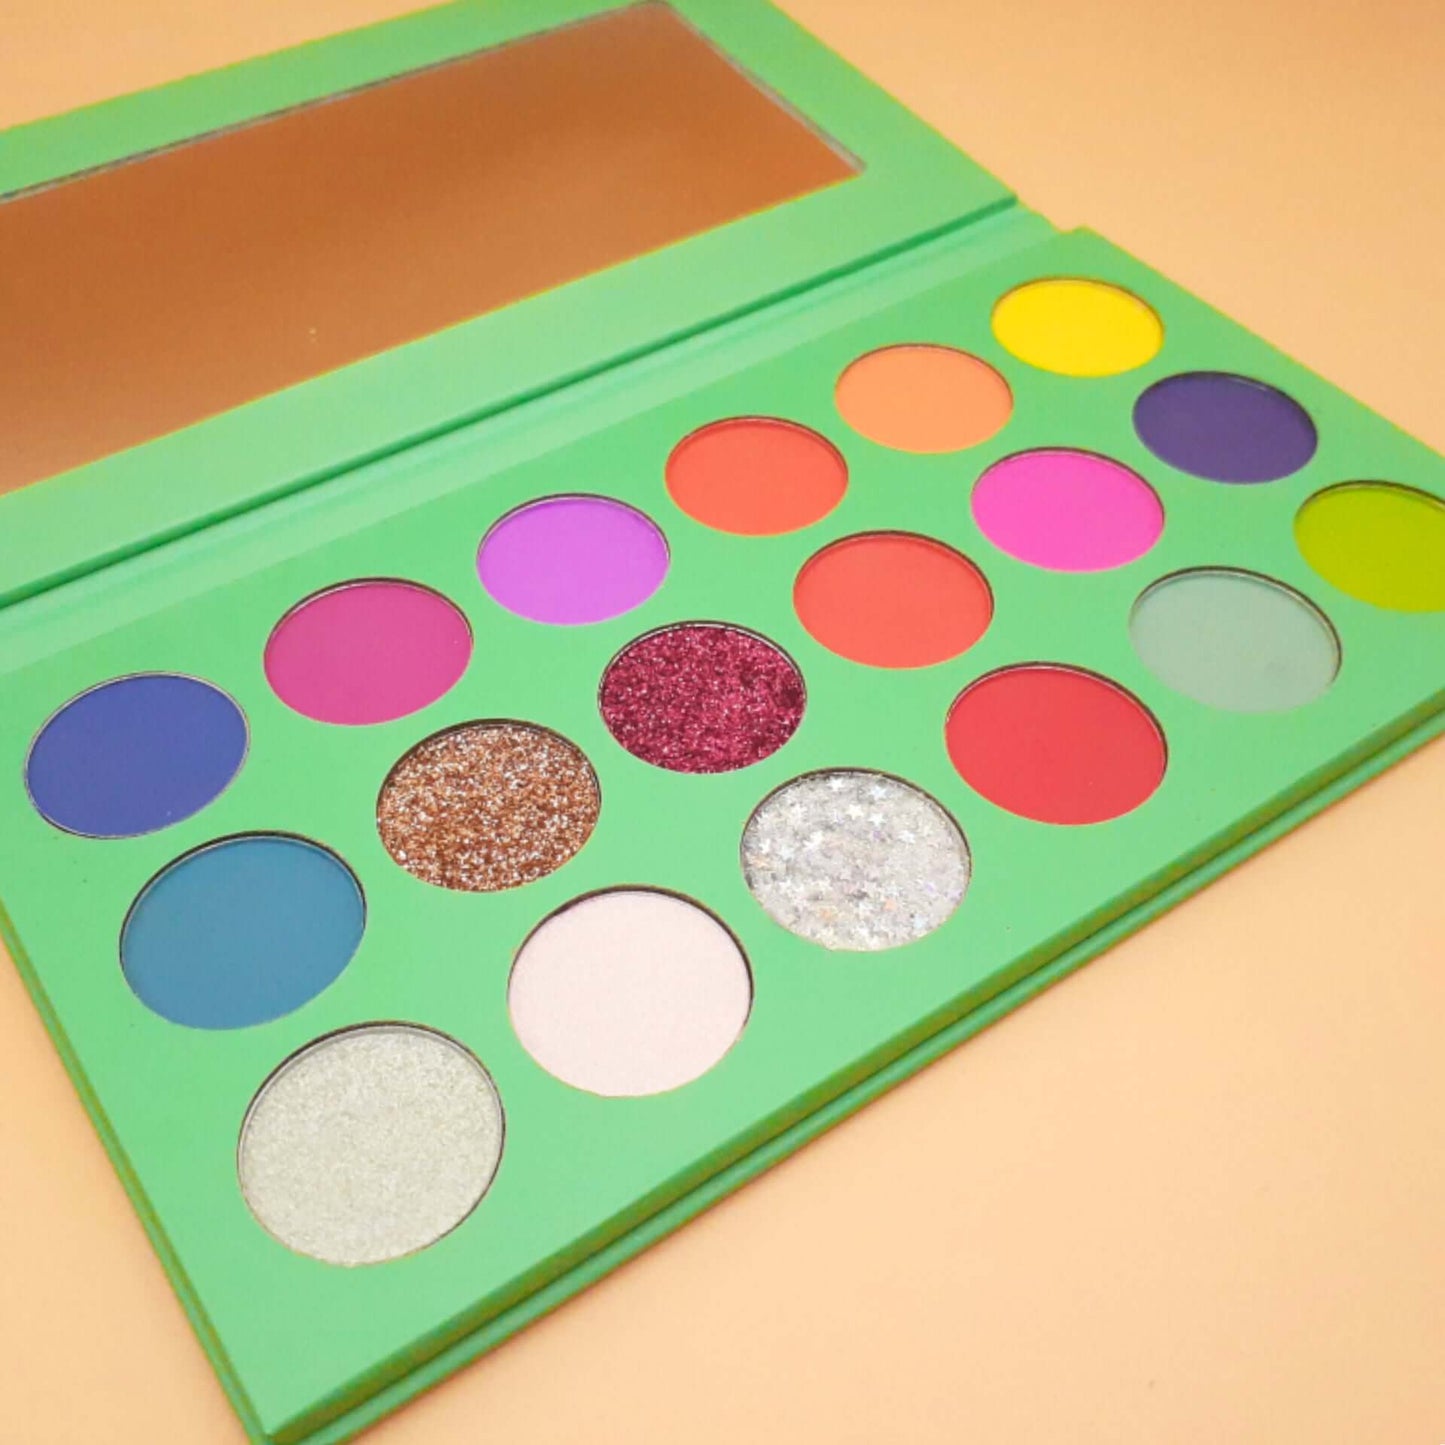 If you love bright color eye shadows, Bold and Luscious Cosmetics 18 color Issa Vibe palette is a great start. It contains all the basic colors to create a look like red, blue, purple, yellow, orange, pink and green. There are also 4 glitter selections on the palette.